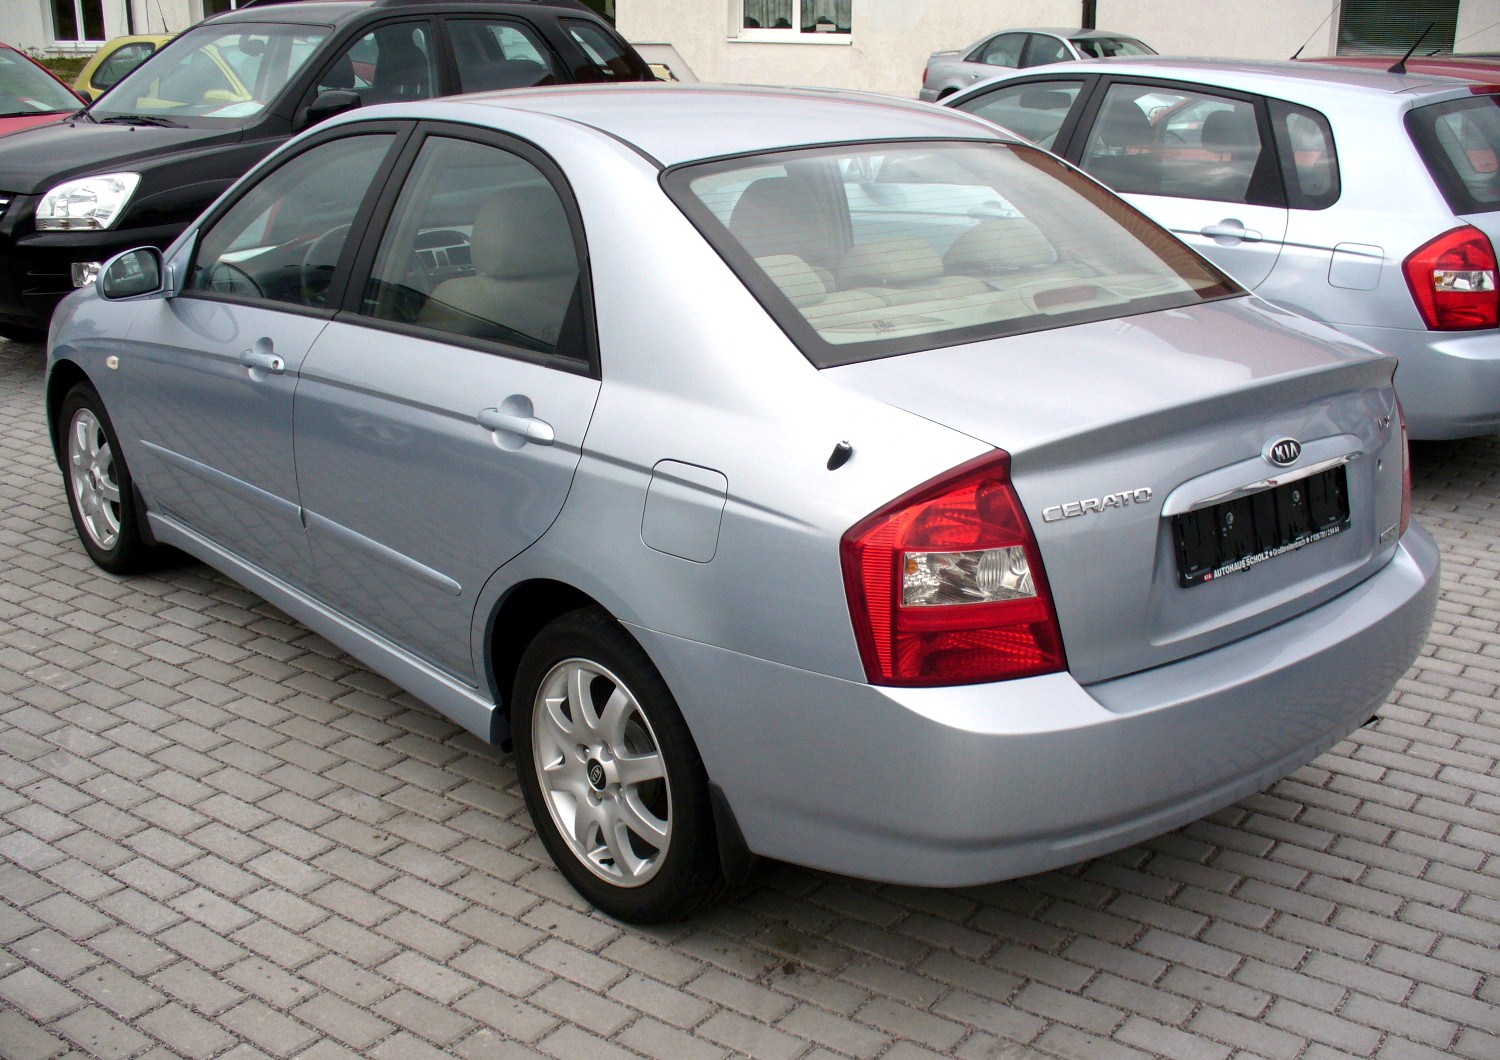 Kia cerato 2.0 ex. Best photos and information of modification.